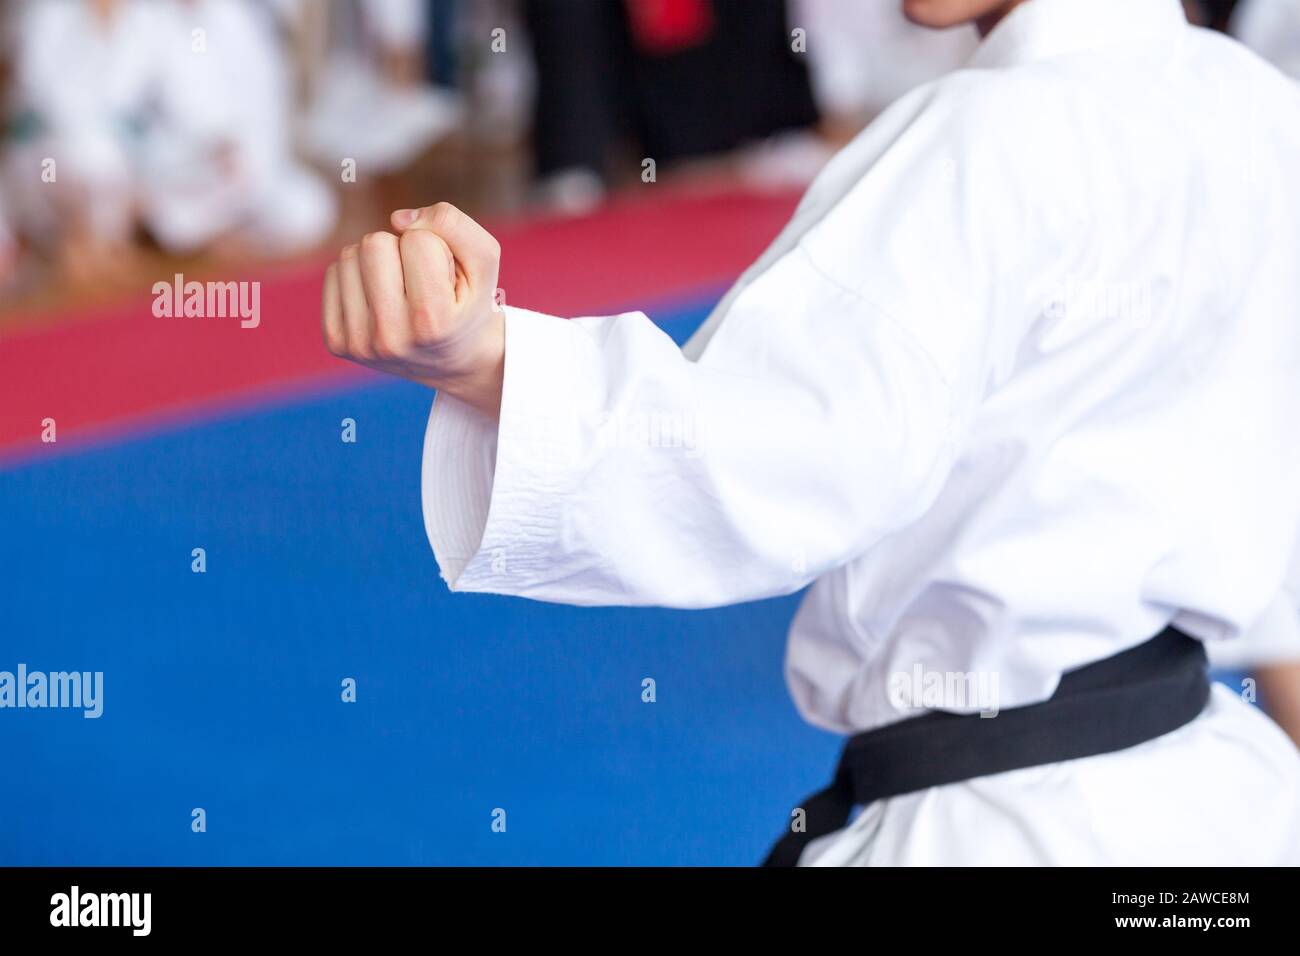 Karate black belt practitioner body position during class Stock Photo